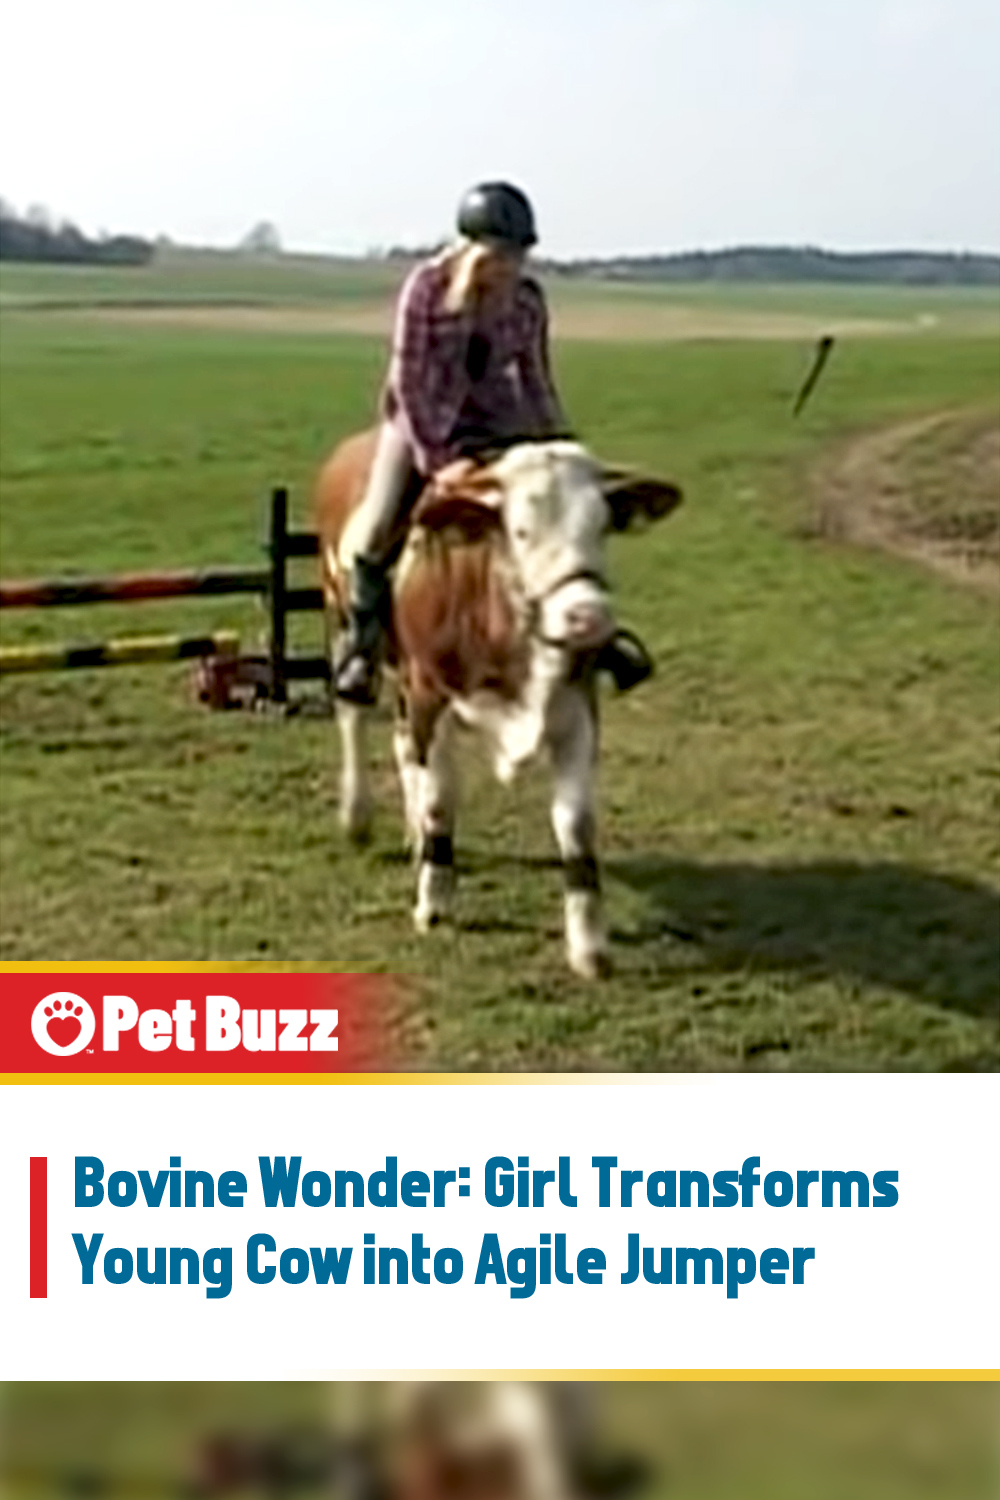 Bovine Wonder: Girl Transforms Young Cow into Agile Jumper